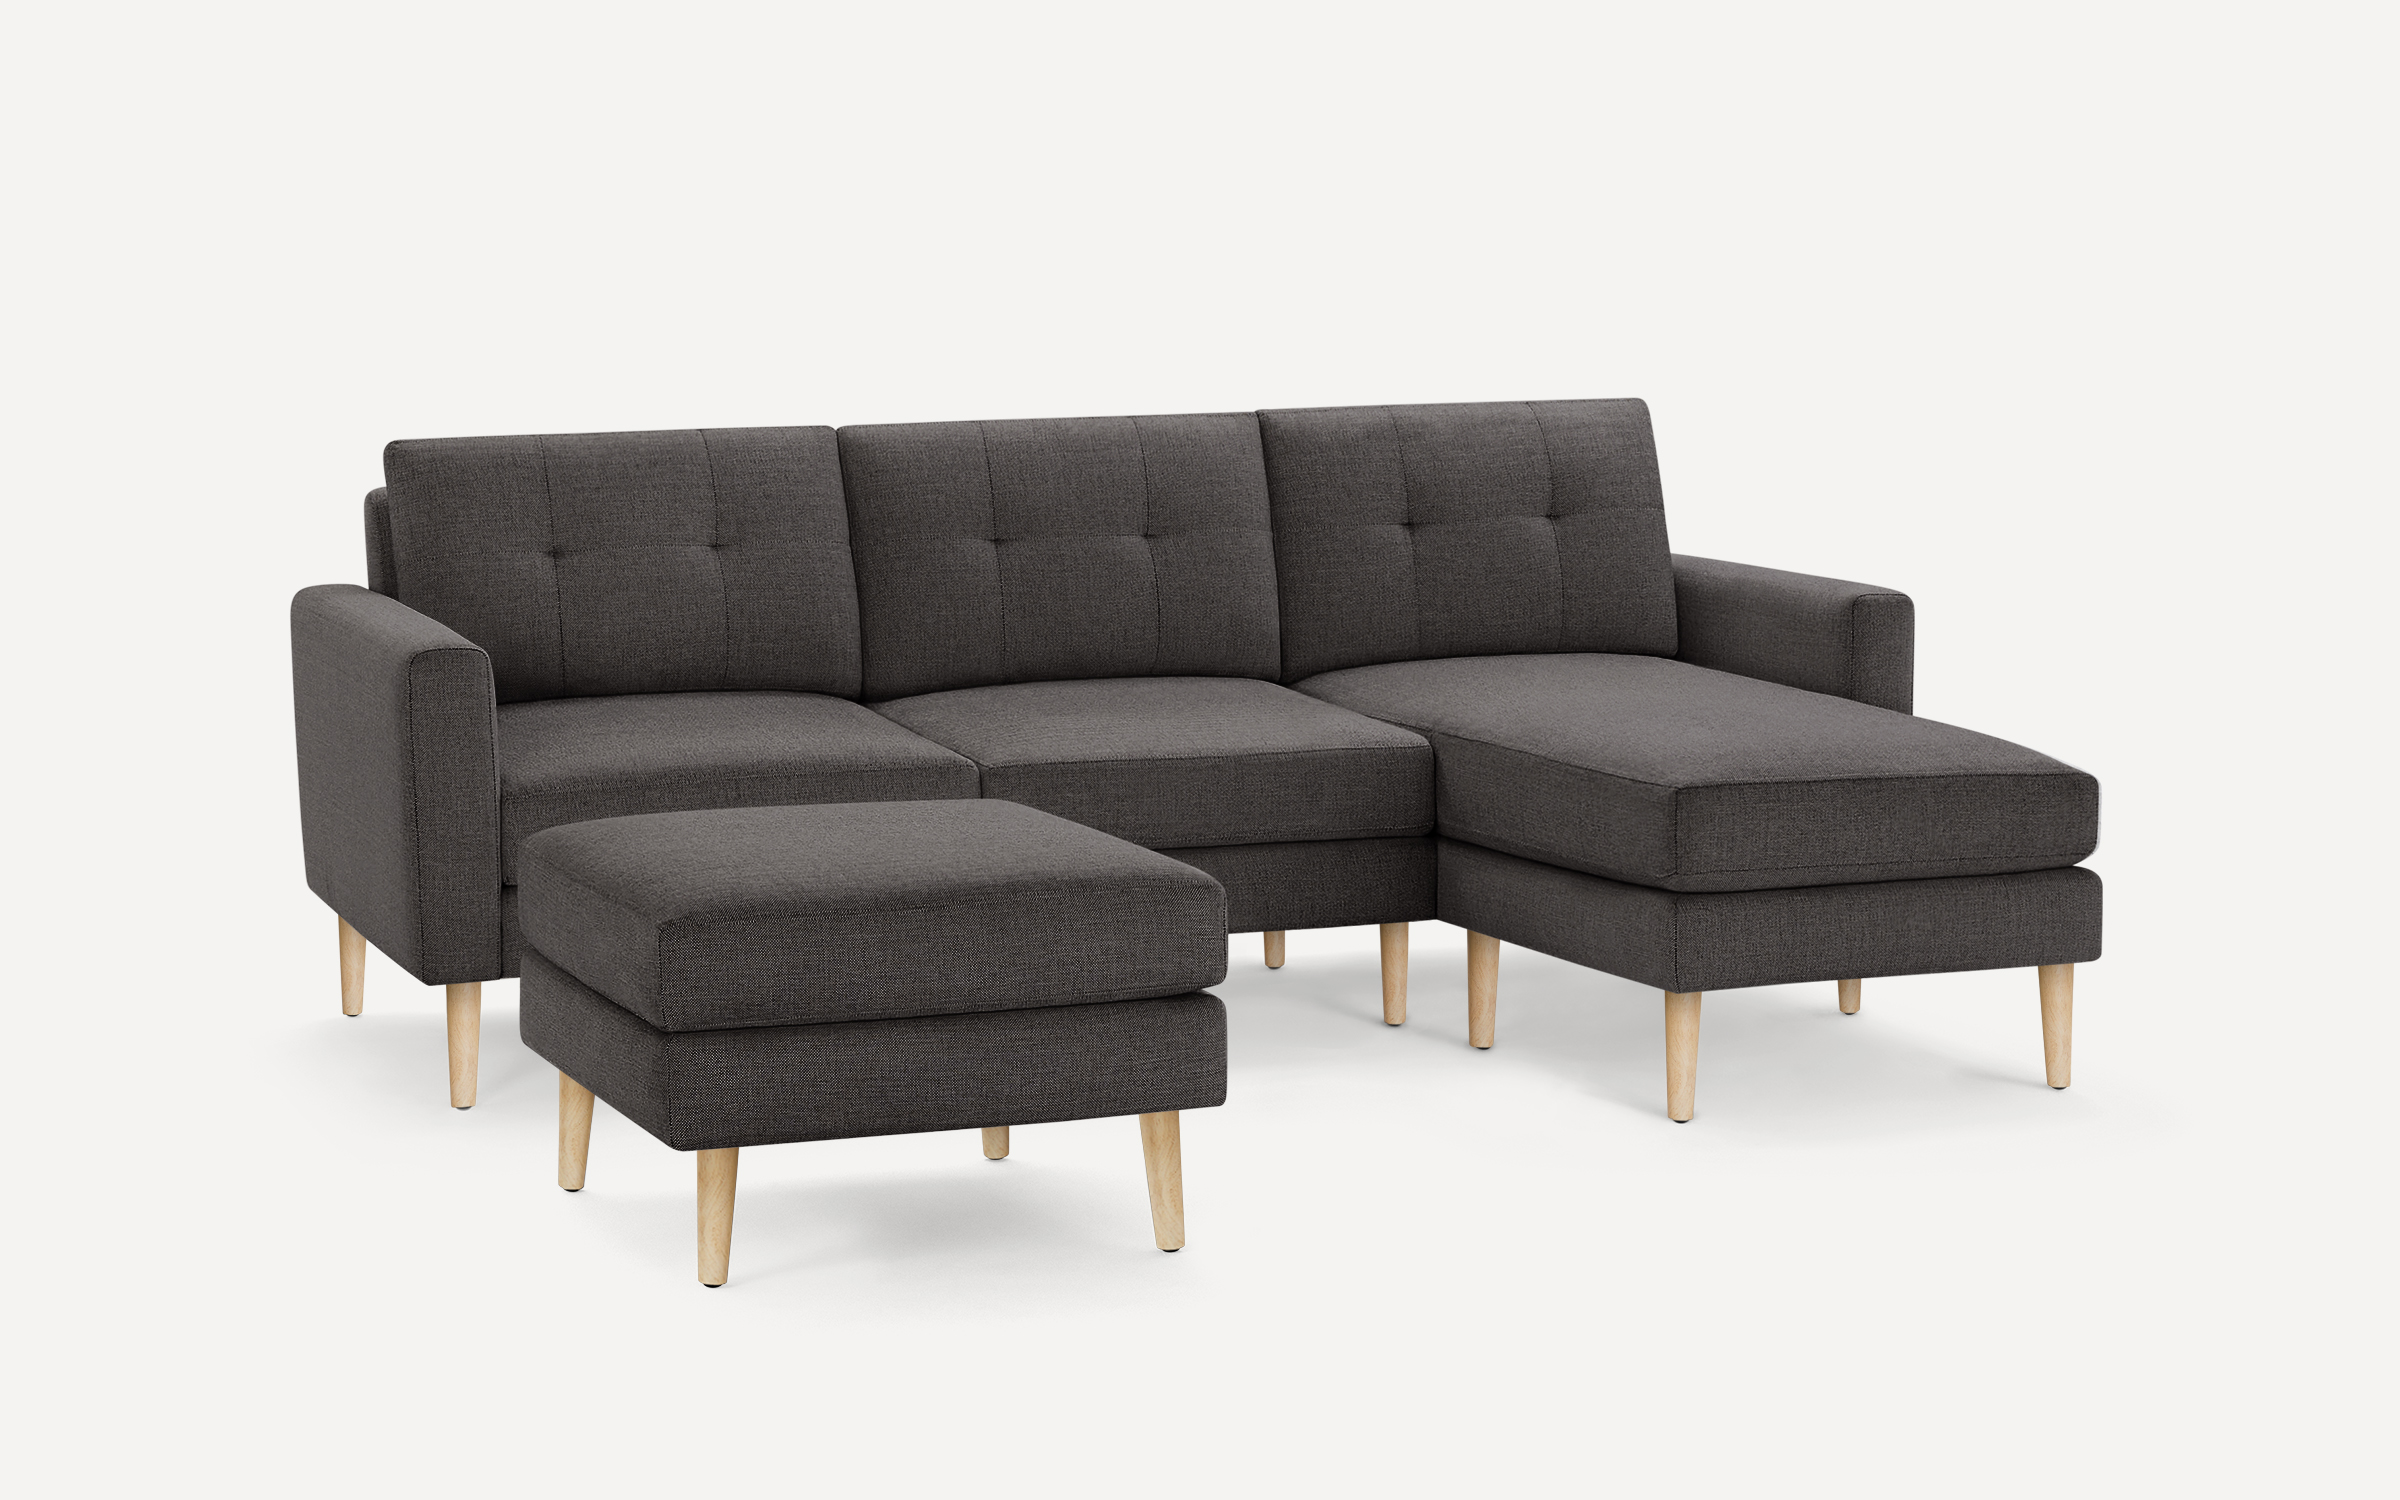 The Nomad Fabric Sectional Sofa with Ottoman Burrow